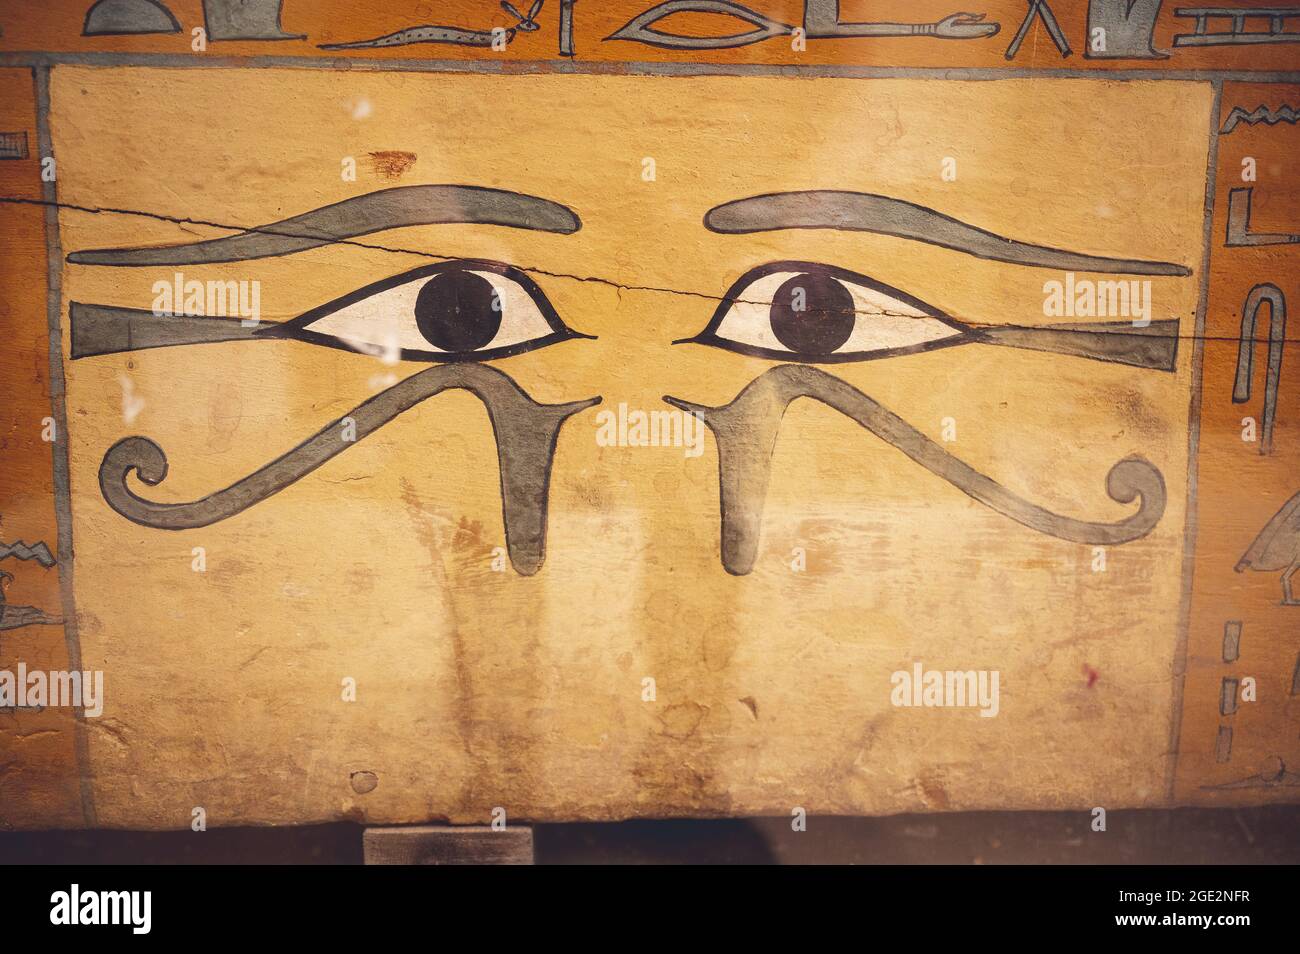 CAIRO, EGYPT - Jun 06, 2021: An ancient Egyptian stone surface in the Egyptian Museum in Cairo with the eye of Horus and hieroglyphs on it Stock Photo